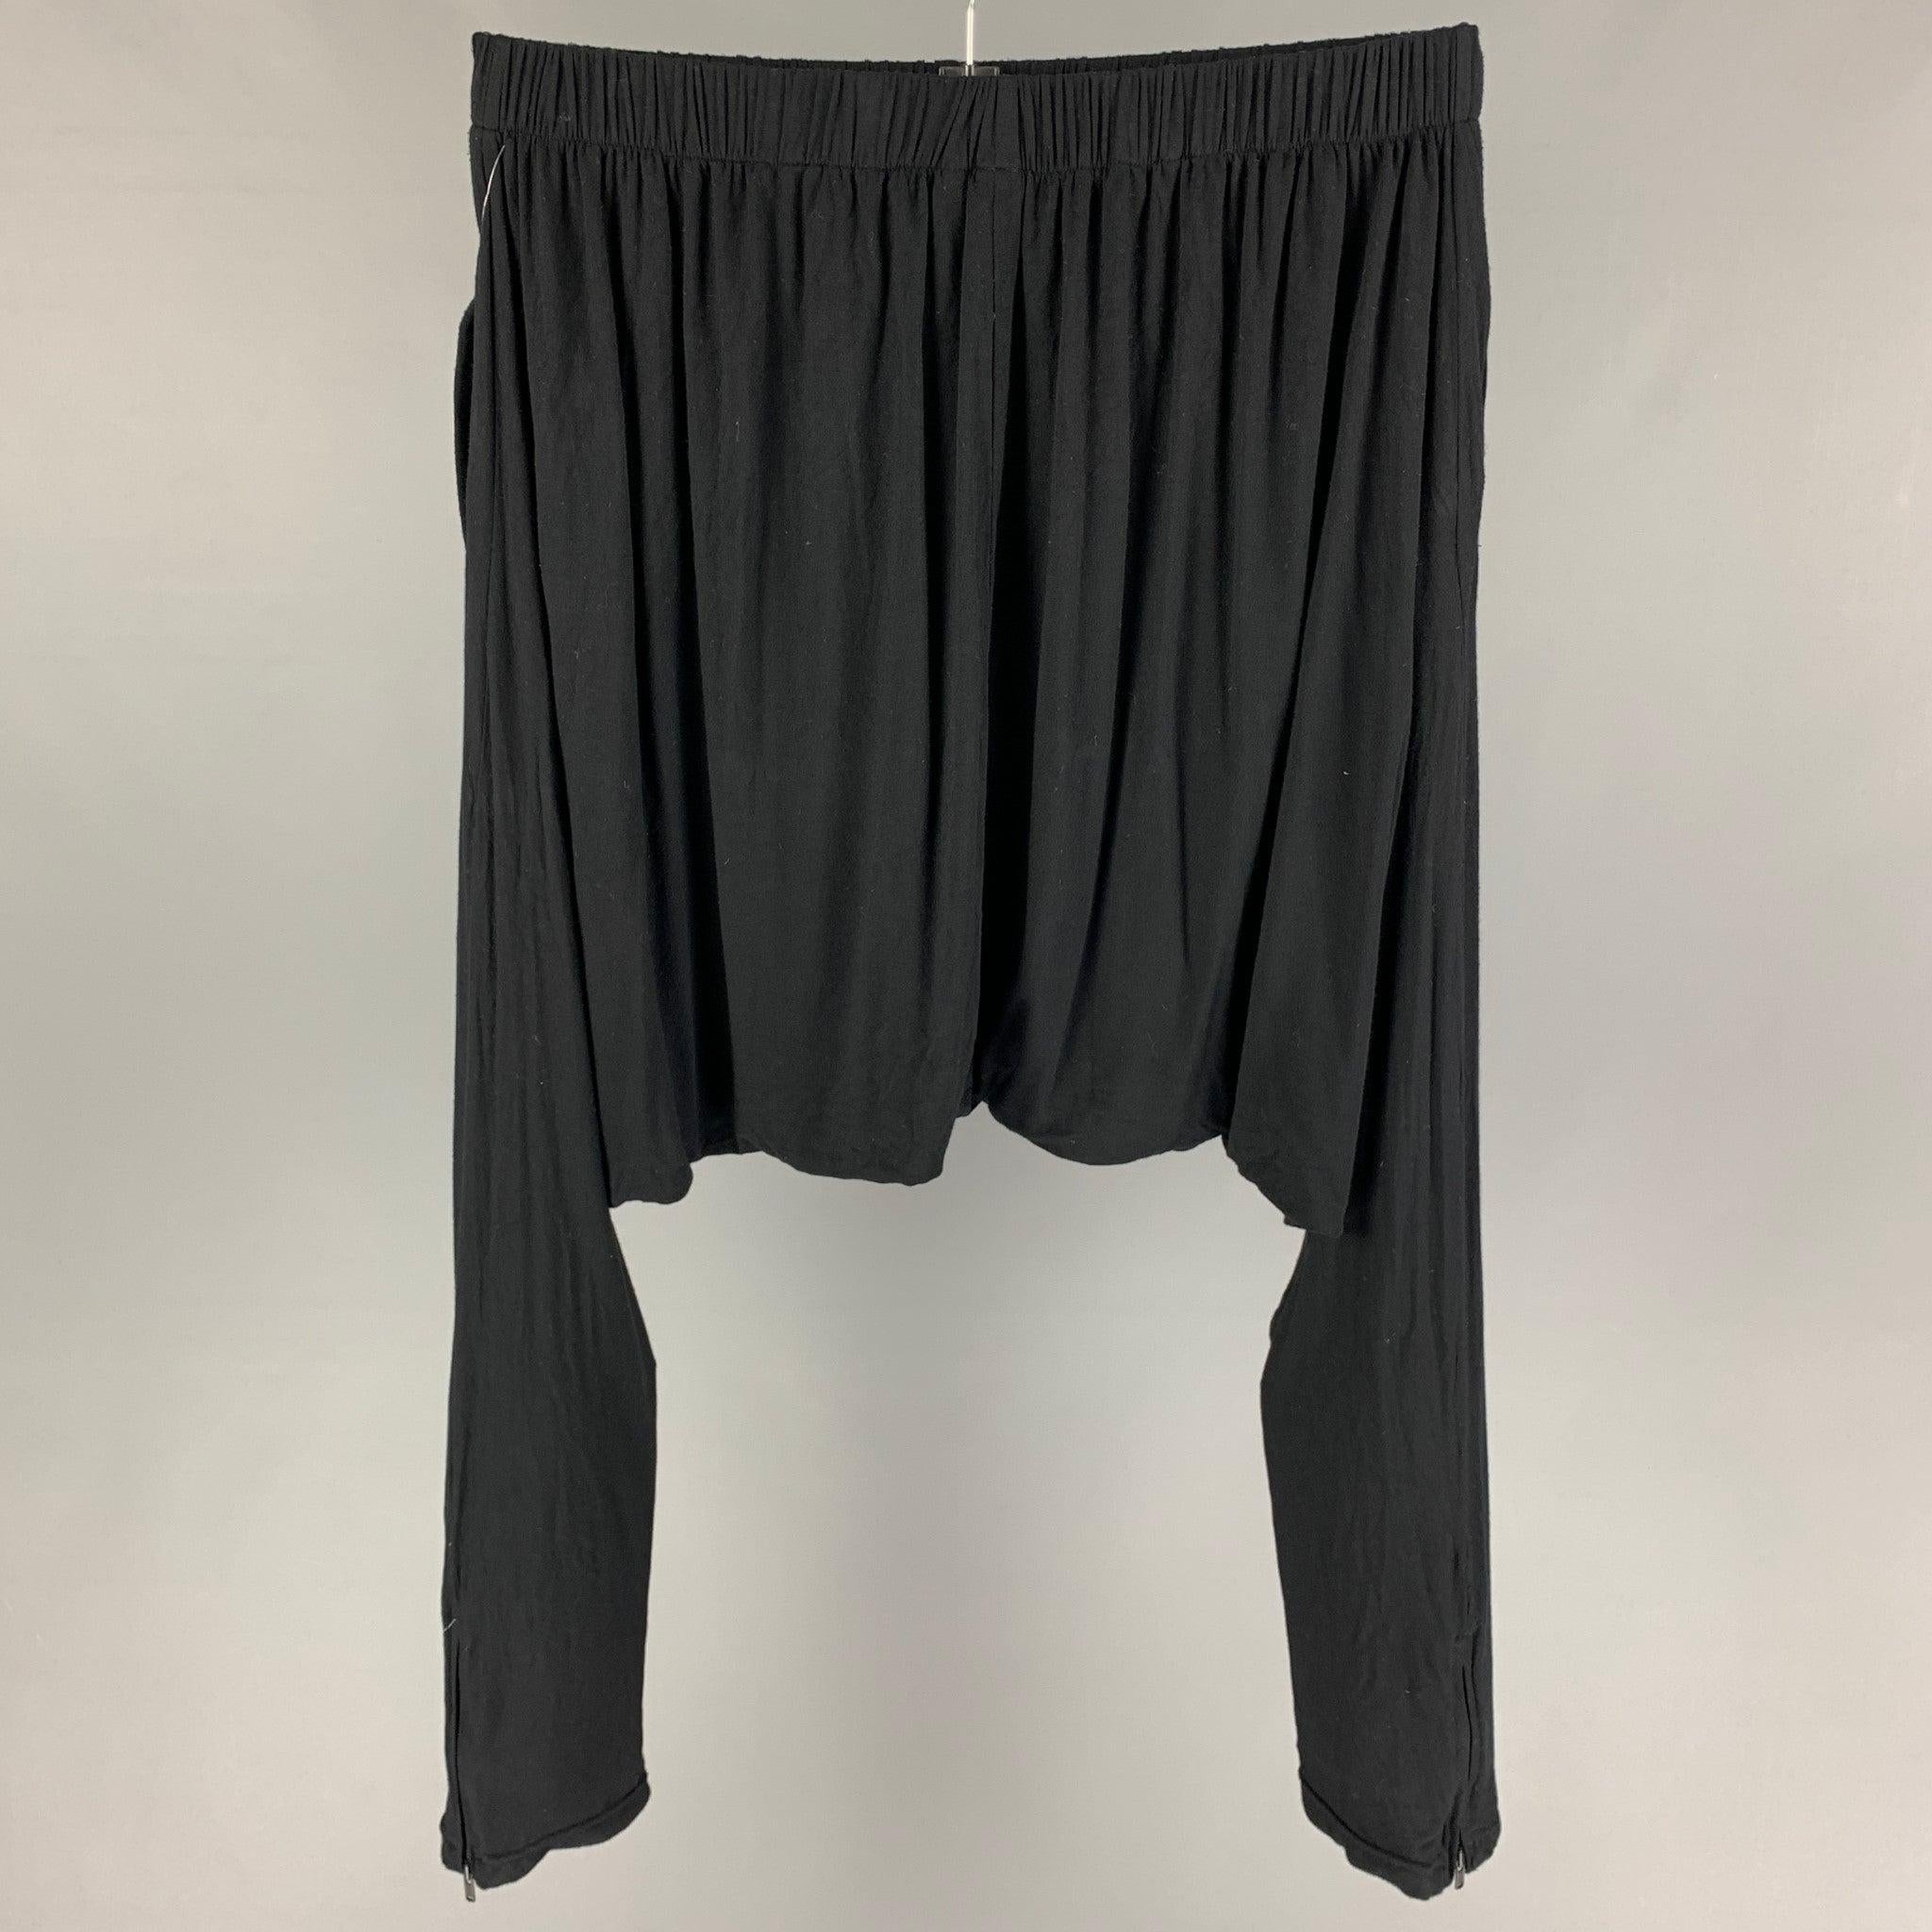 SKINGRAFT pants comes in a black rayon / silk featuring a drop-crotch style, zipped cuffs, and a elastic waist.
Good
Pre-Owned Condition. 

Marked:   M  

Measurements: 
  Waist: 28 inches  Rise: 20 inches  Inseam: 36 inches 
  
  
 
Reference: